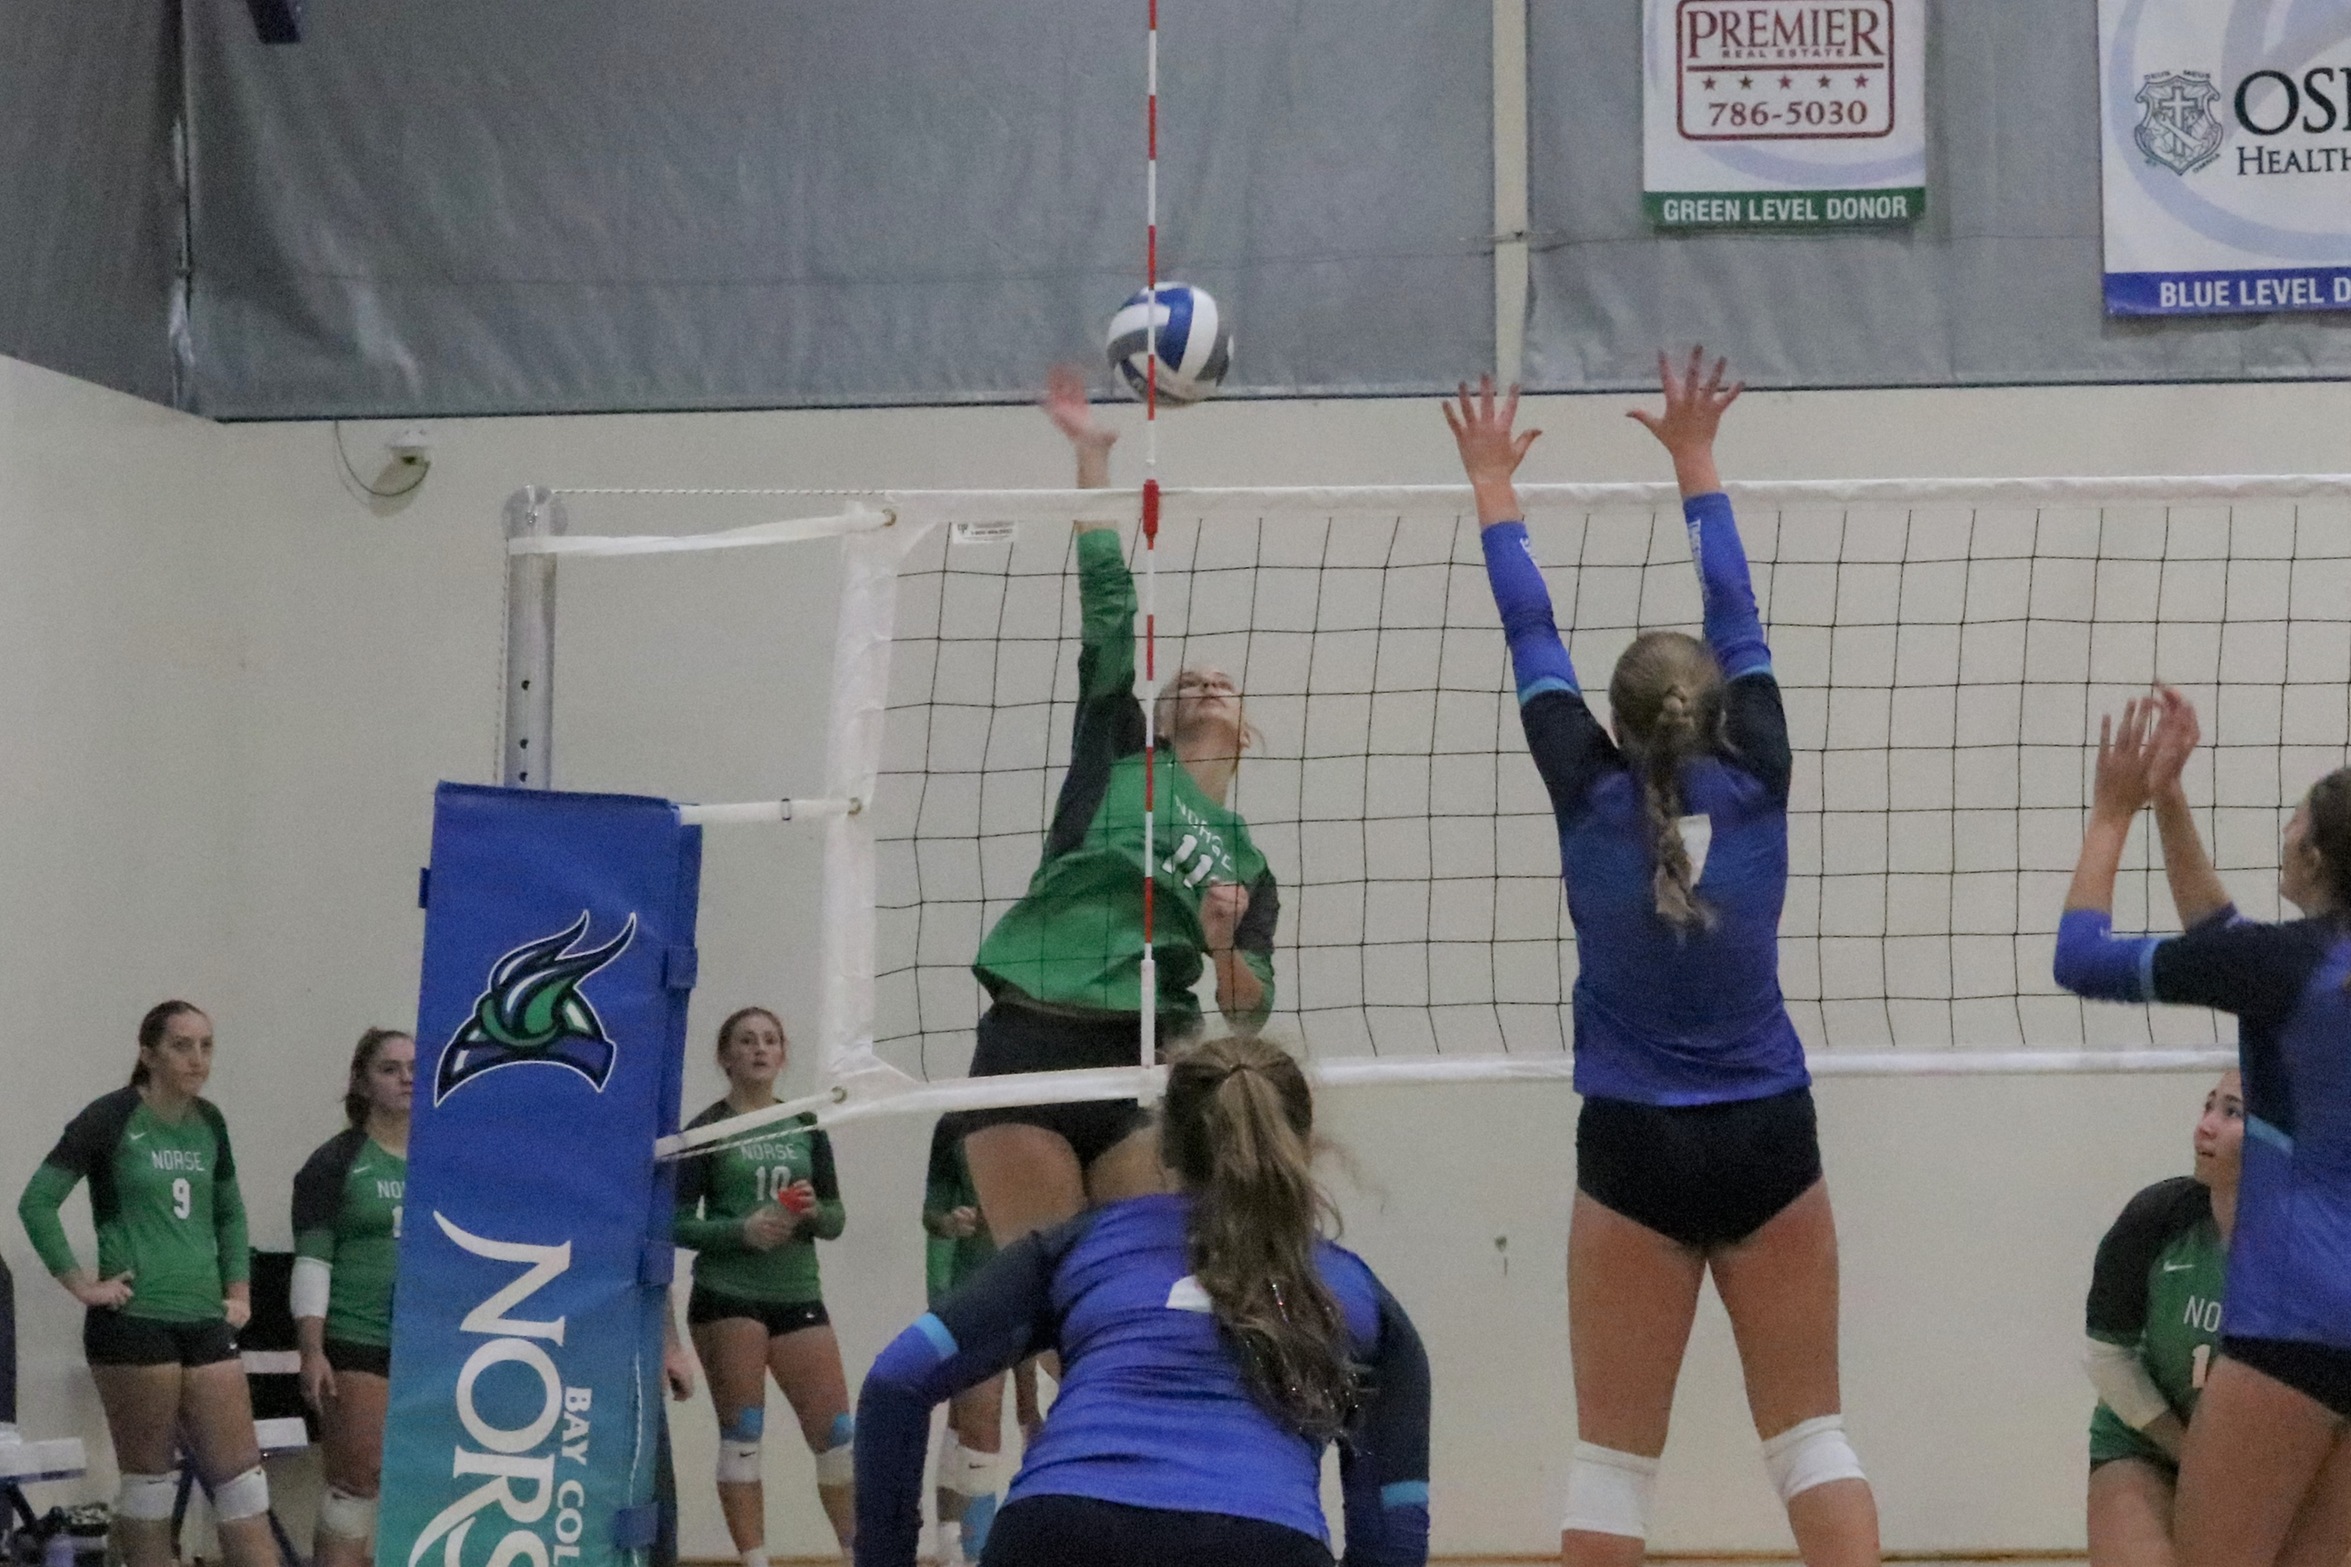 Olyivia Saxton in the air, swinging for a kill as an opponent leaps to attempt to block